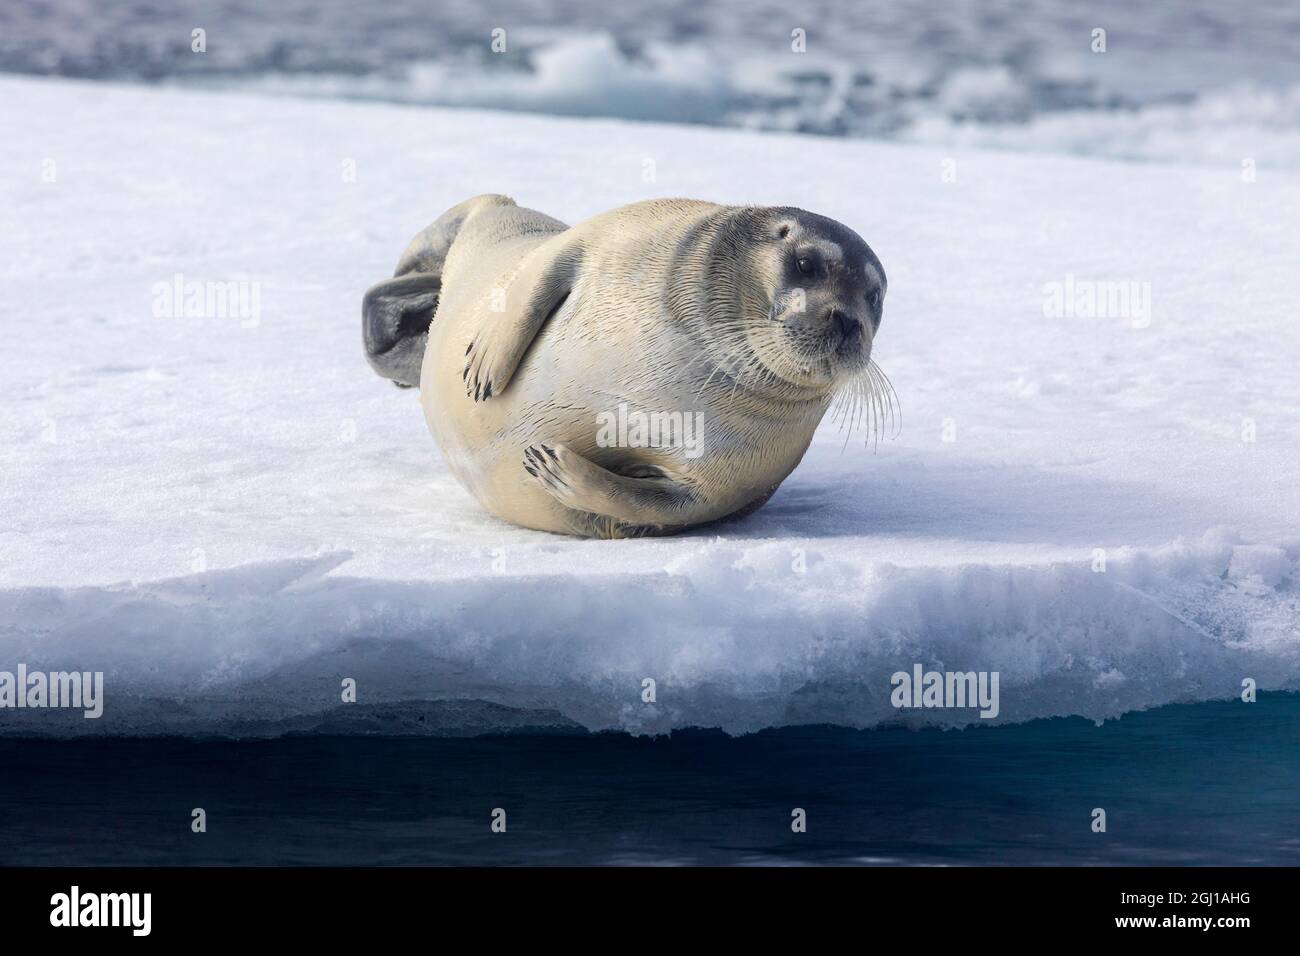 Arctic, north of Svalbard. A portrait of a young bearded seal hauled out on the pack ice. Stock Photo